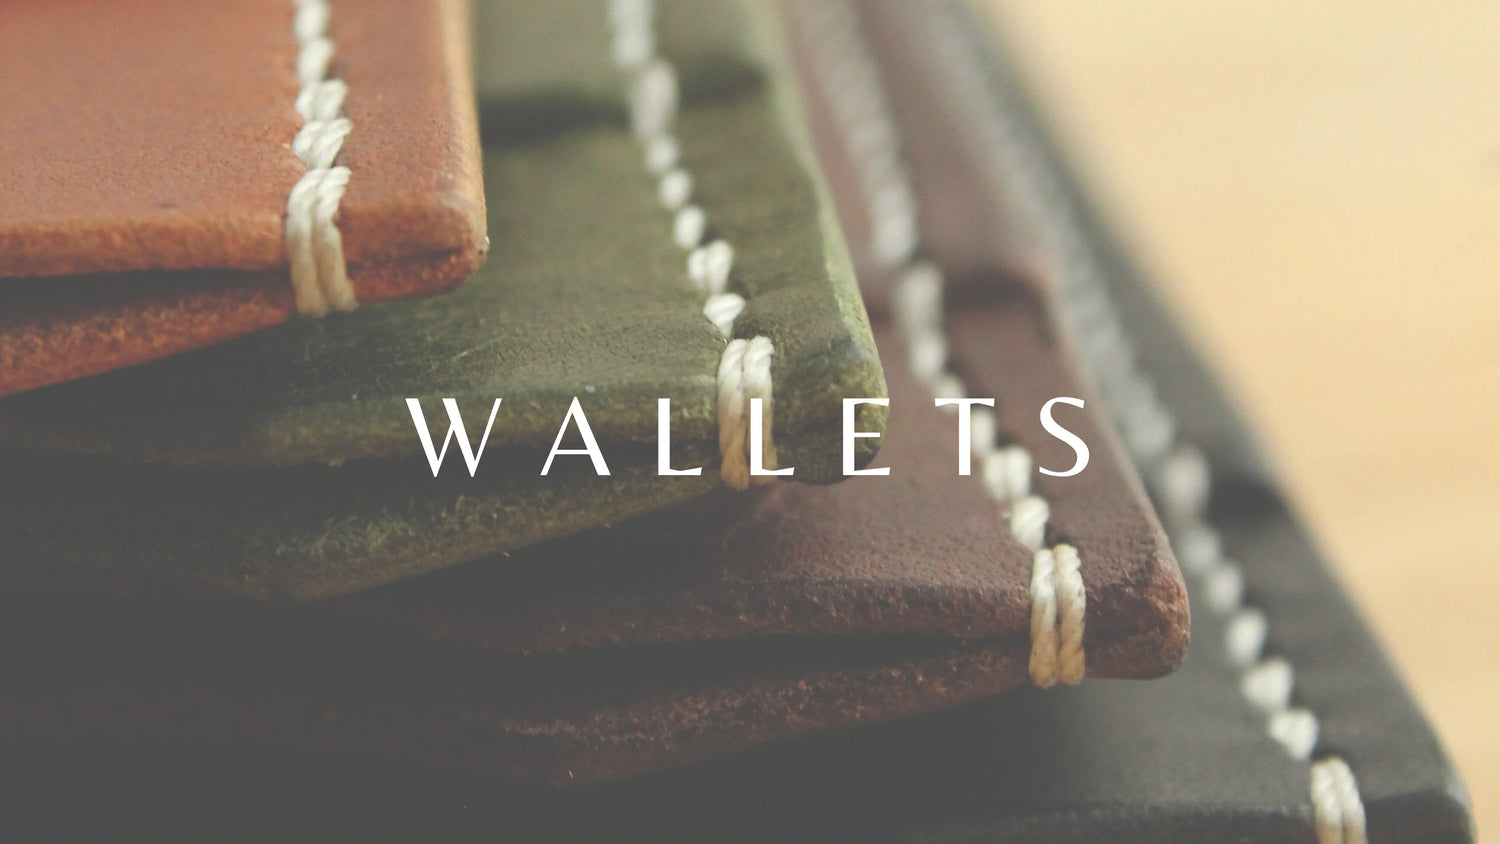 LEATHER WALLETS